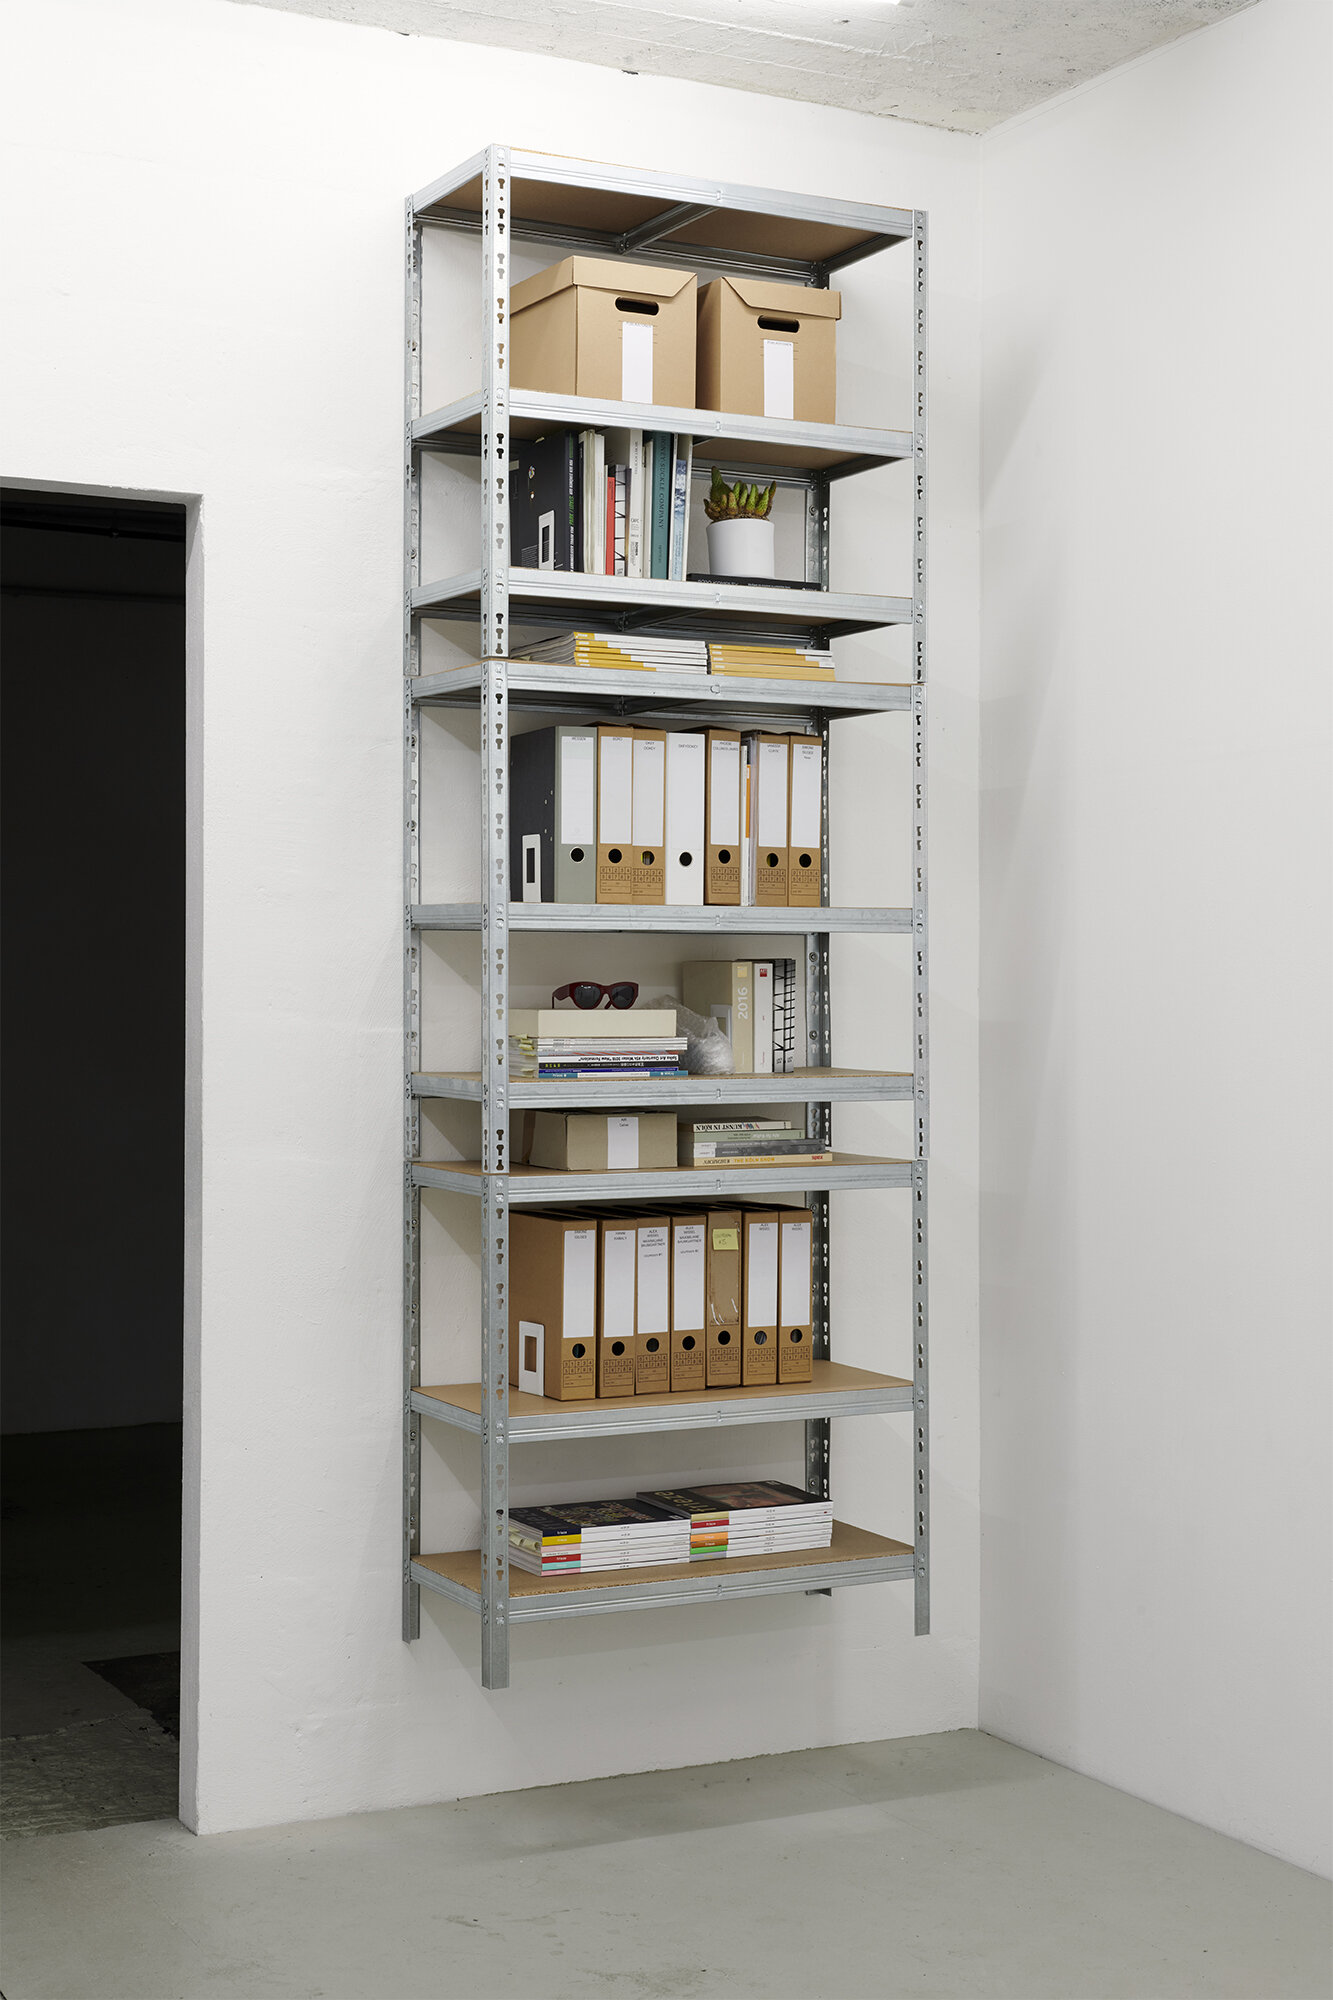  Tobias Hohn &amp; Stanton Taylor,  Relief , 2019, gallery shelving (Regalux), artist documents, art fair documents (all financial information removed for privacy), various art publications, issues of Artforum, Frieze, and Spike, shades, cactus  